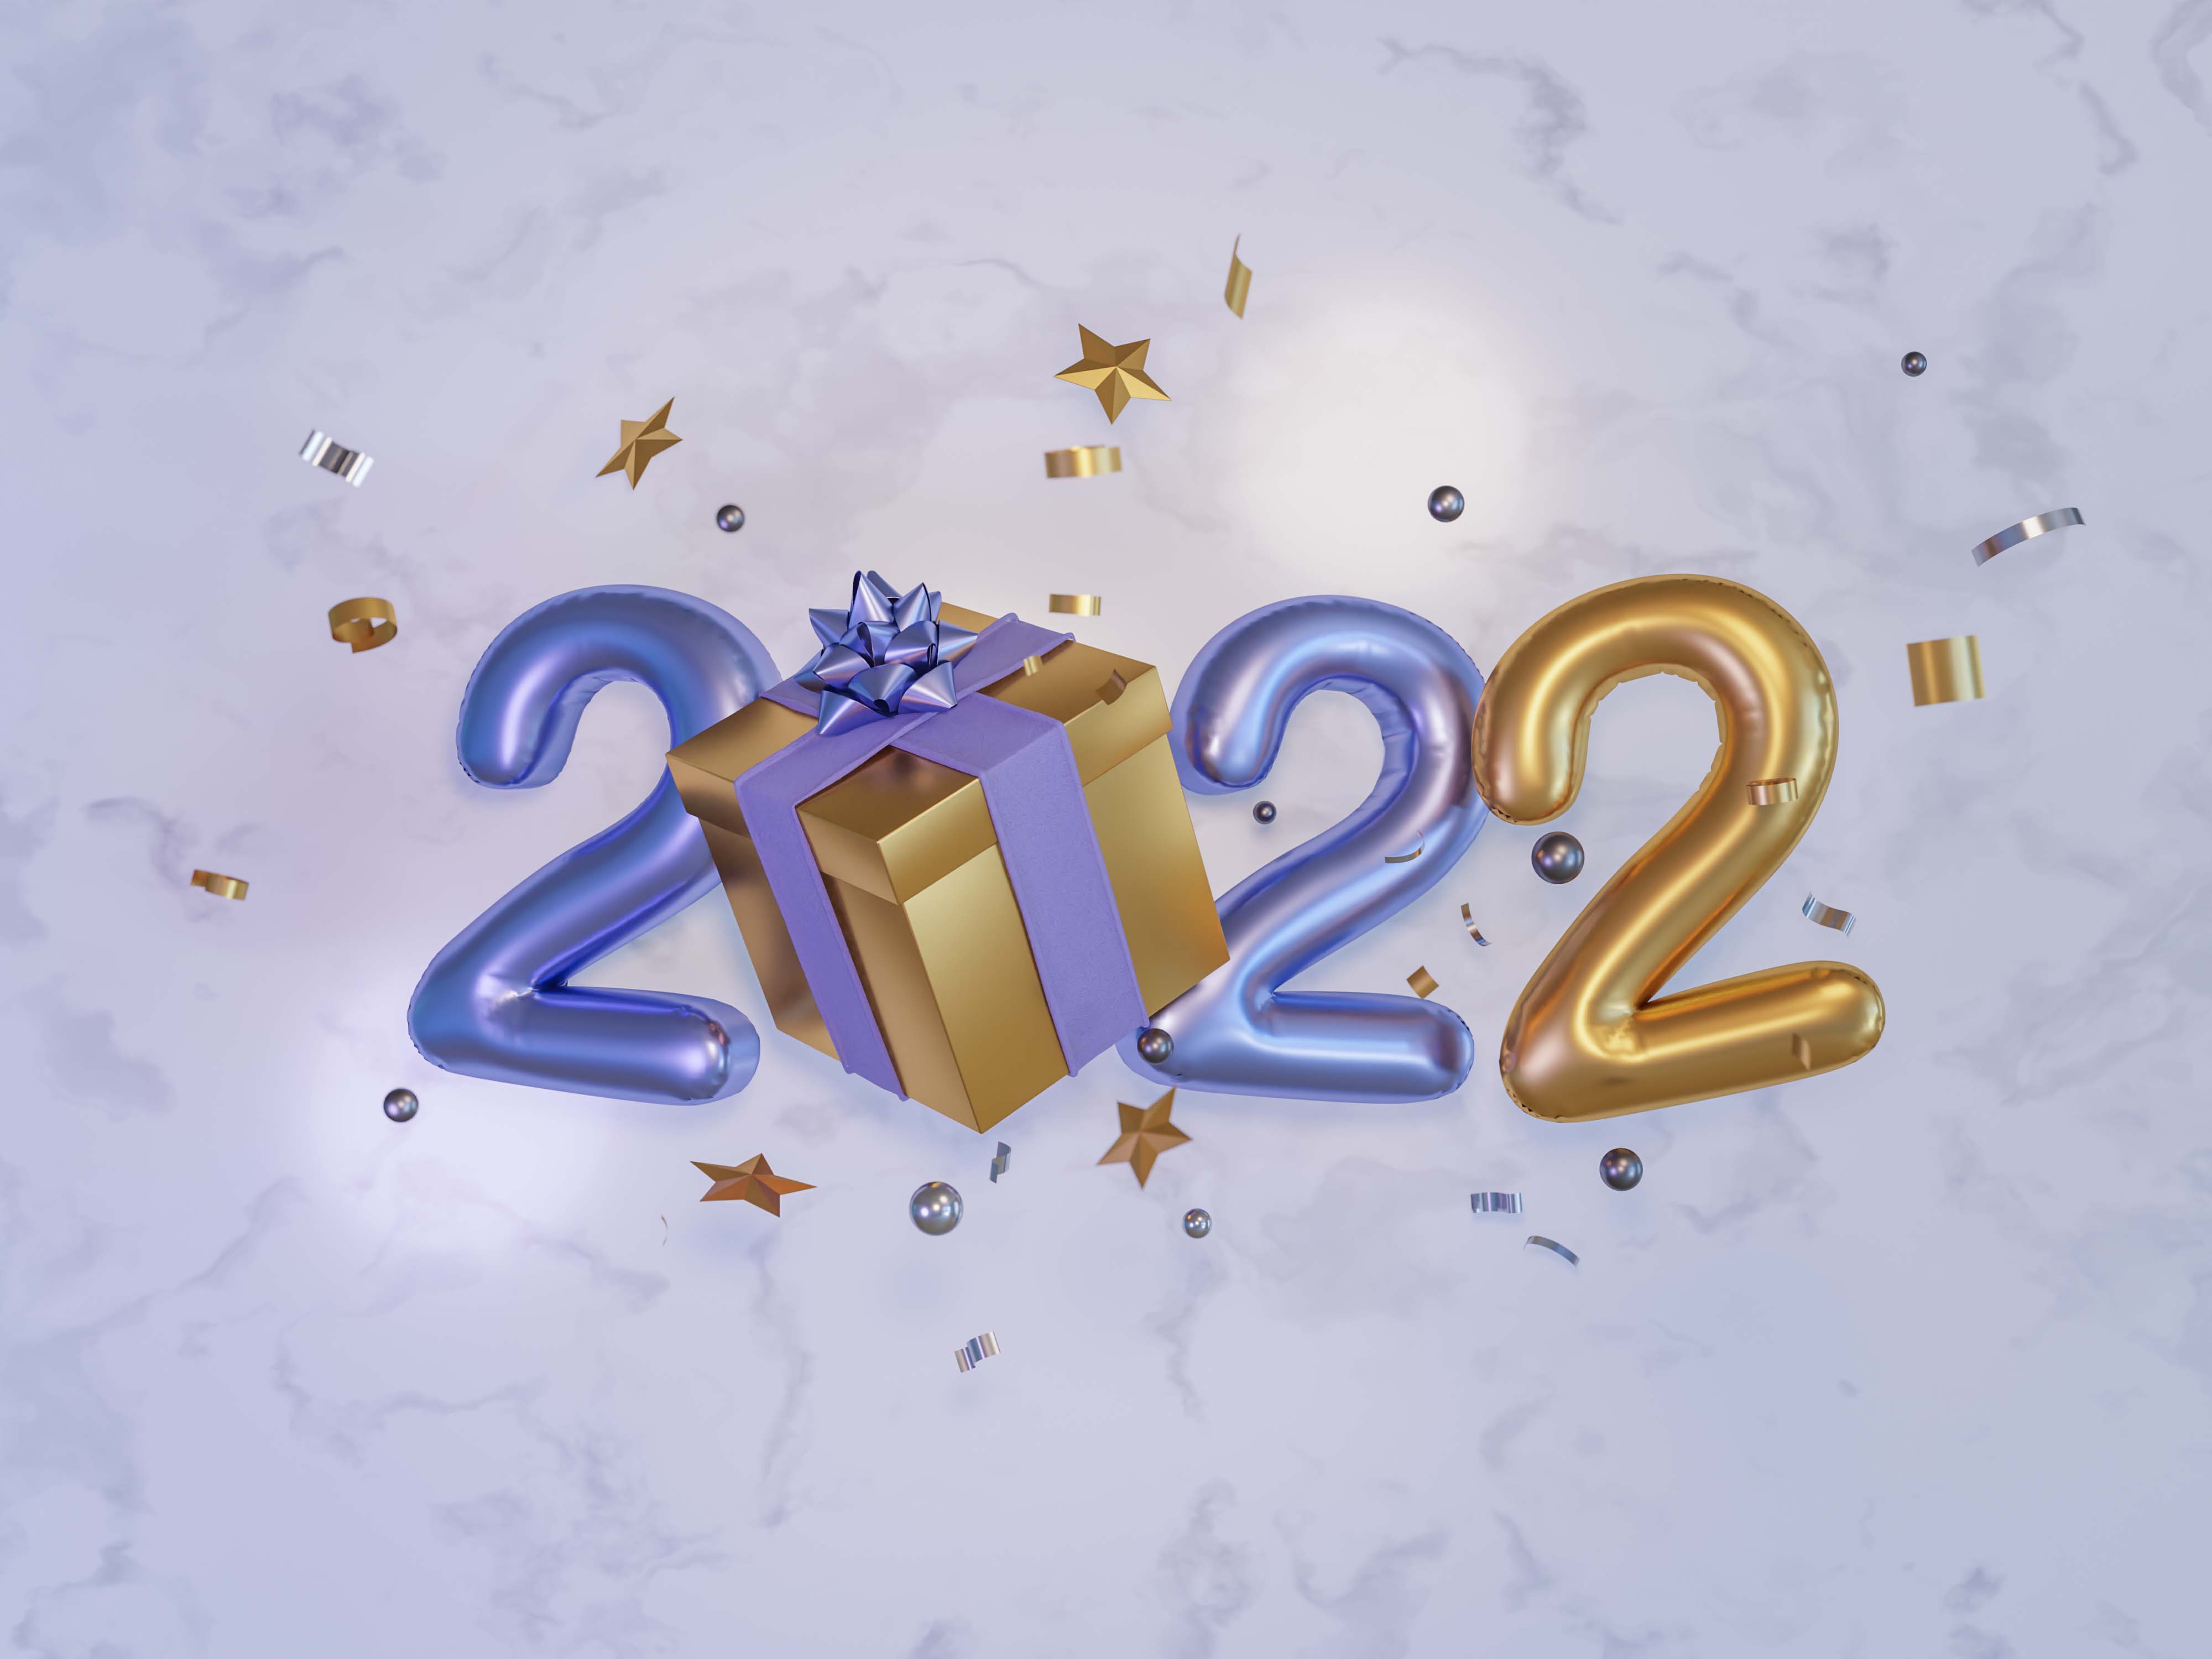 New Year 2022 4K Wallpapers Full HD 